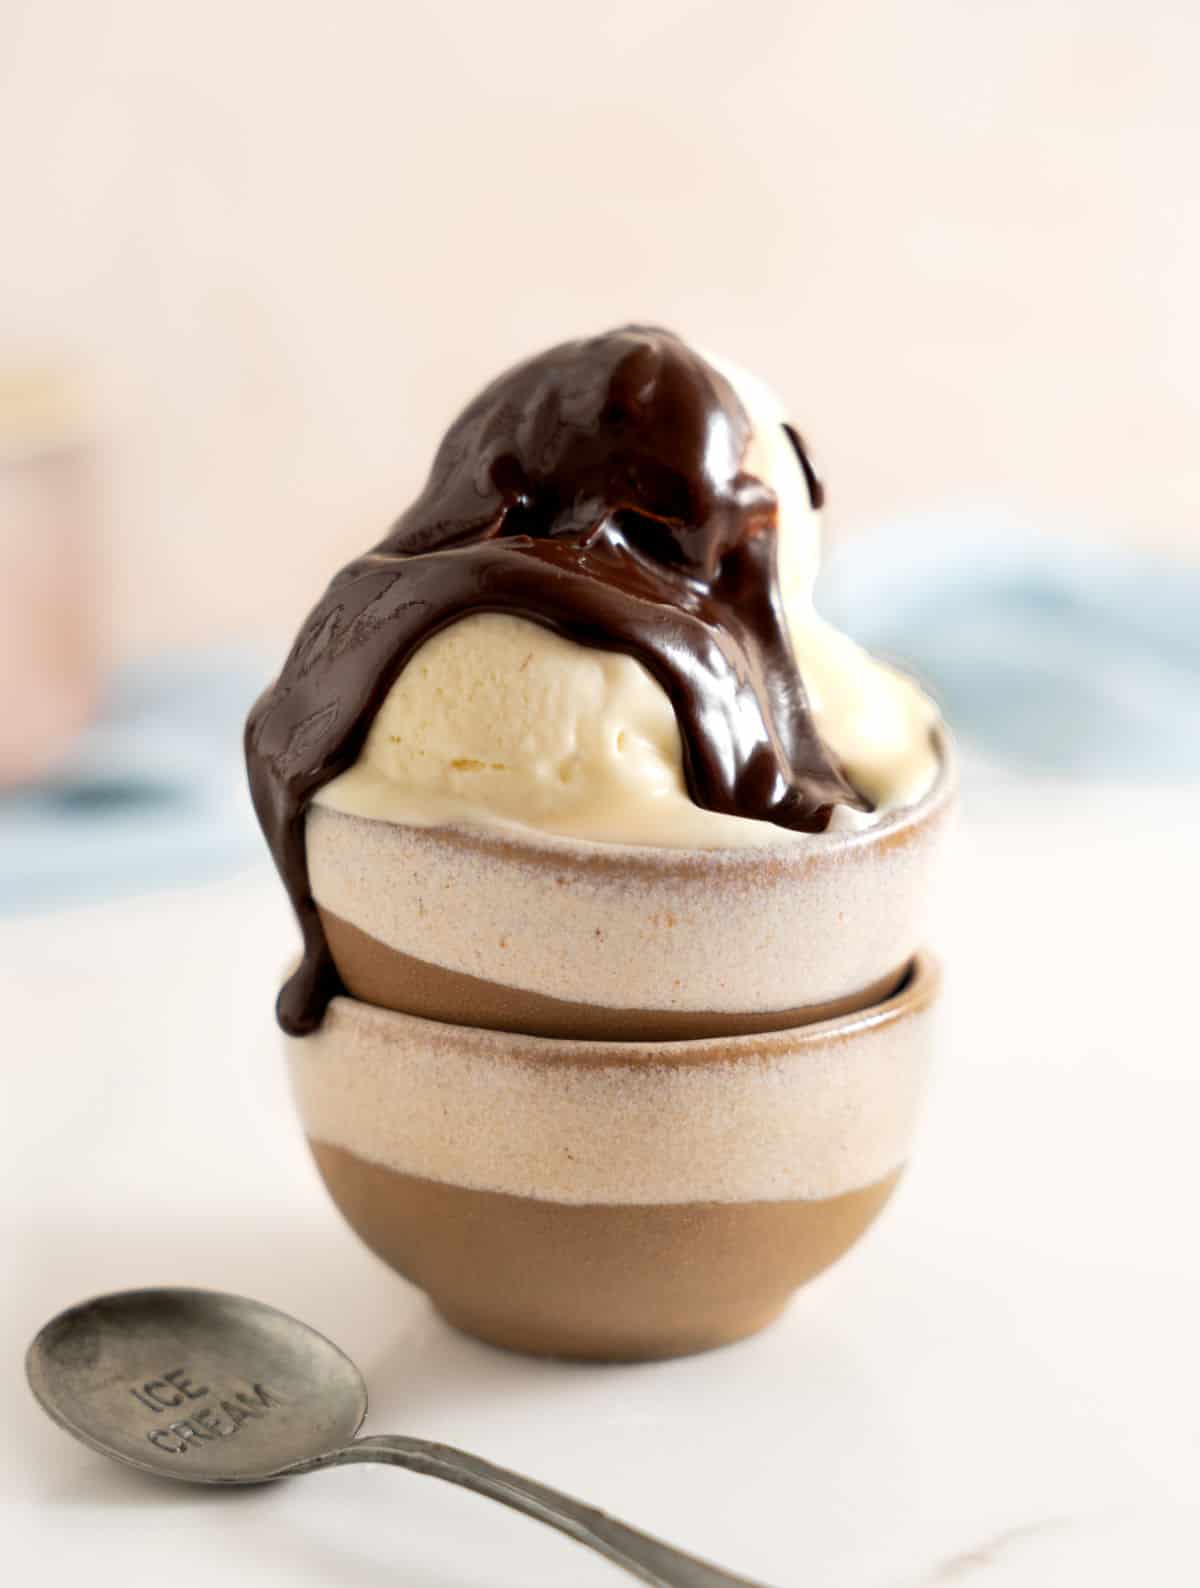 Chocolate sauce on vanilla ice cream on beige brown bowls with a spoon. White surface, pink blue background.